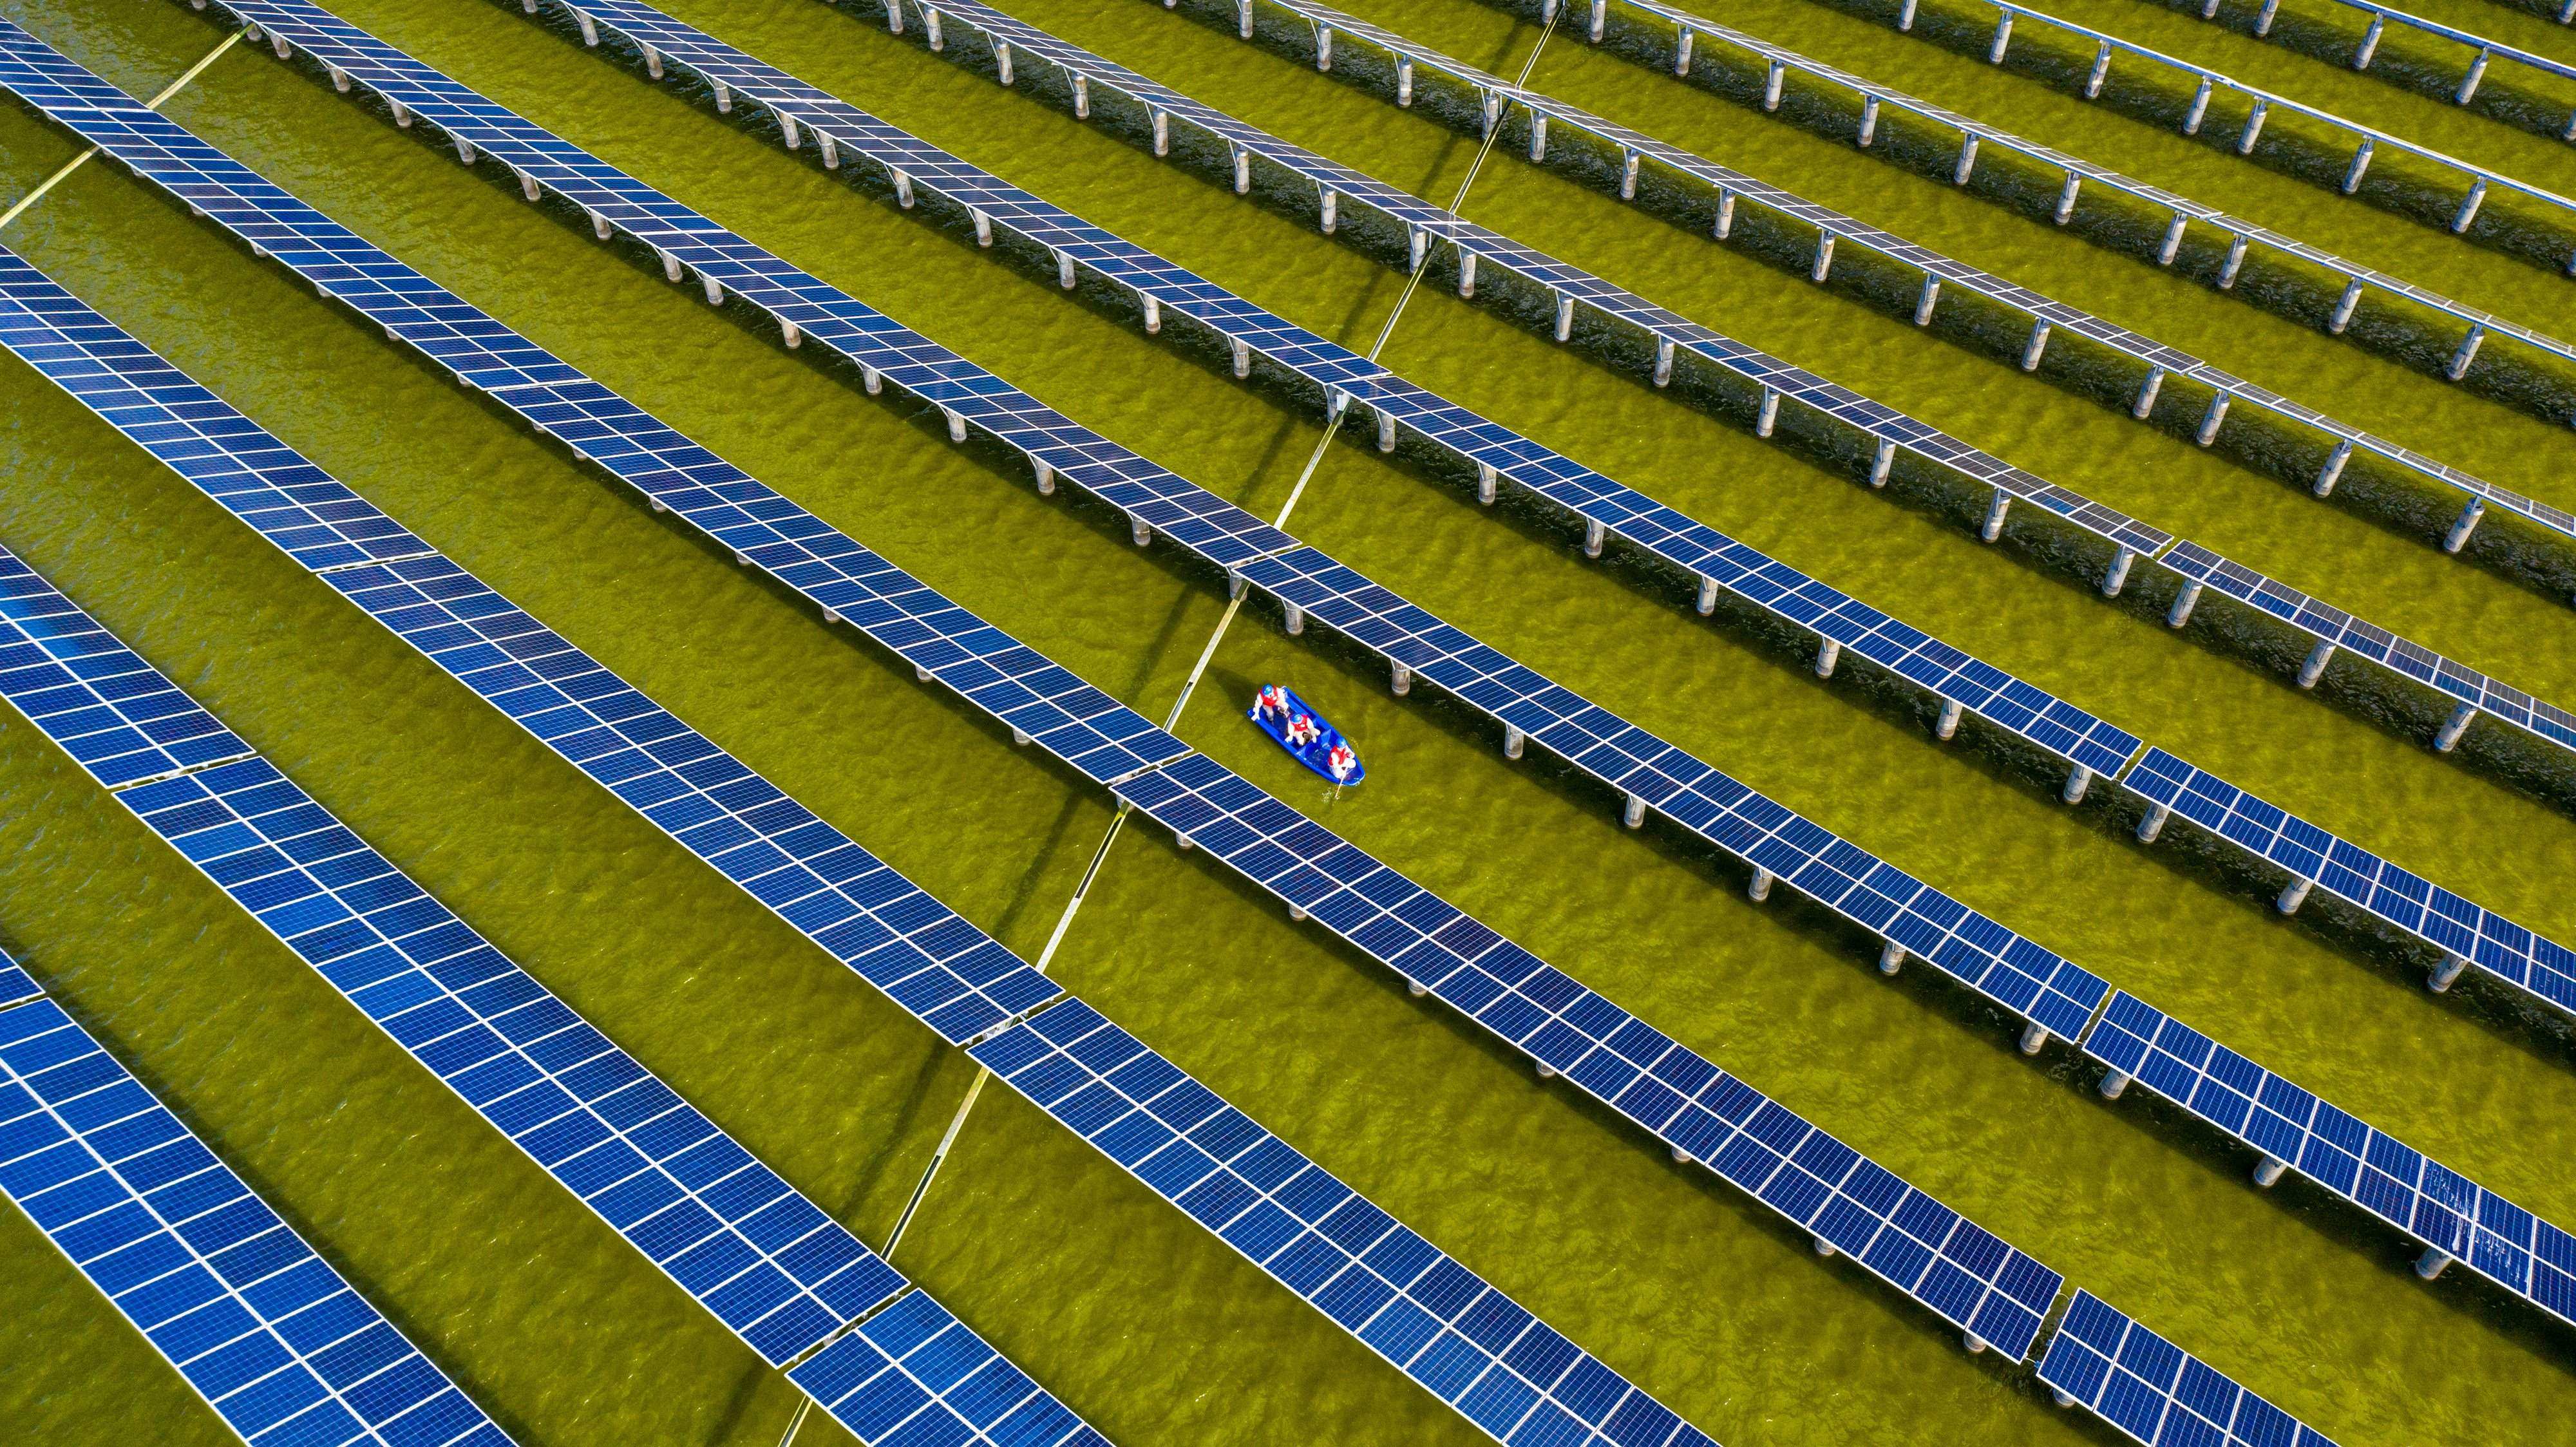 Workers in a boat check solar panels at a photovoltaic power station built on a fishpond in Haian, in China’s eastern Jiangsu province, on July 19. Photo: AFP